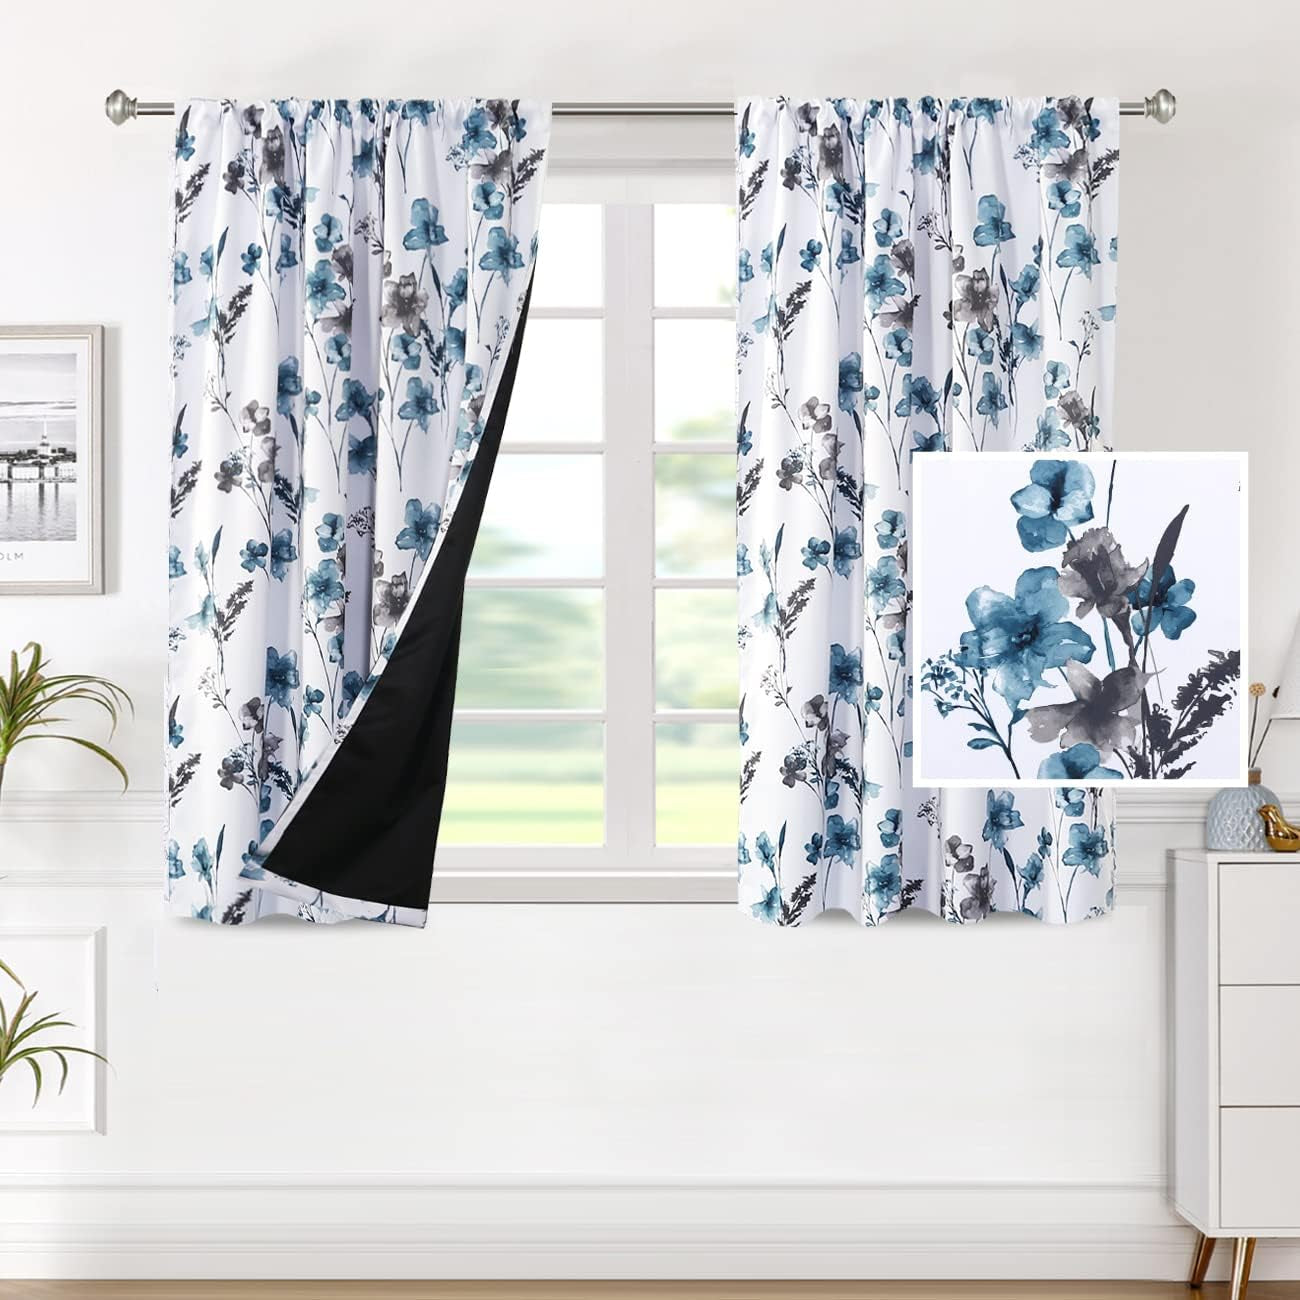 H.VERSAILTEX 100% Blackout Curtains for Bedroom Cattleya Floral Printed Drapes 84 Inches Long Leah Floral Pattern Full Light Blocking Drapes with Black Liner Rod Pocket 2 Panels, Navy/Taupe  H.VERSAILTEX Grey/Blue 52"W X 45"L 